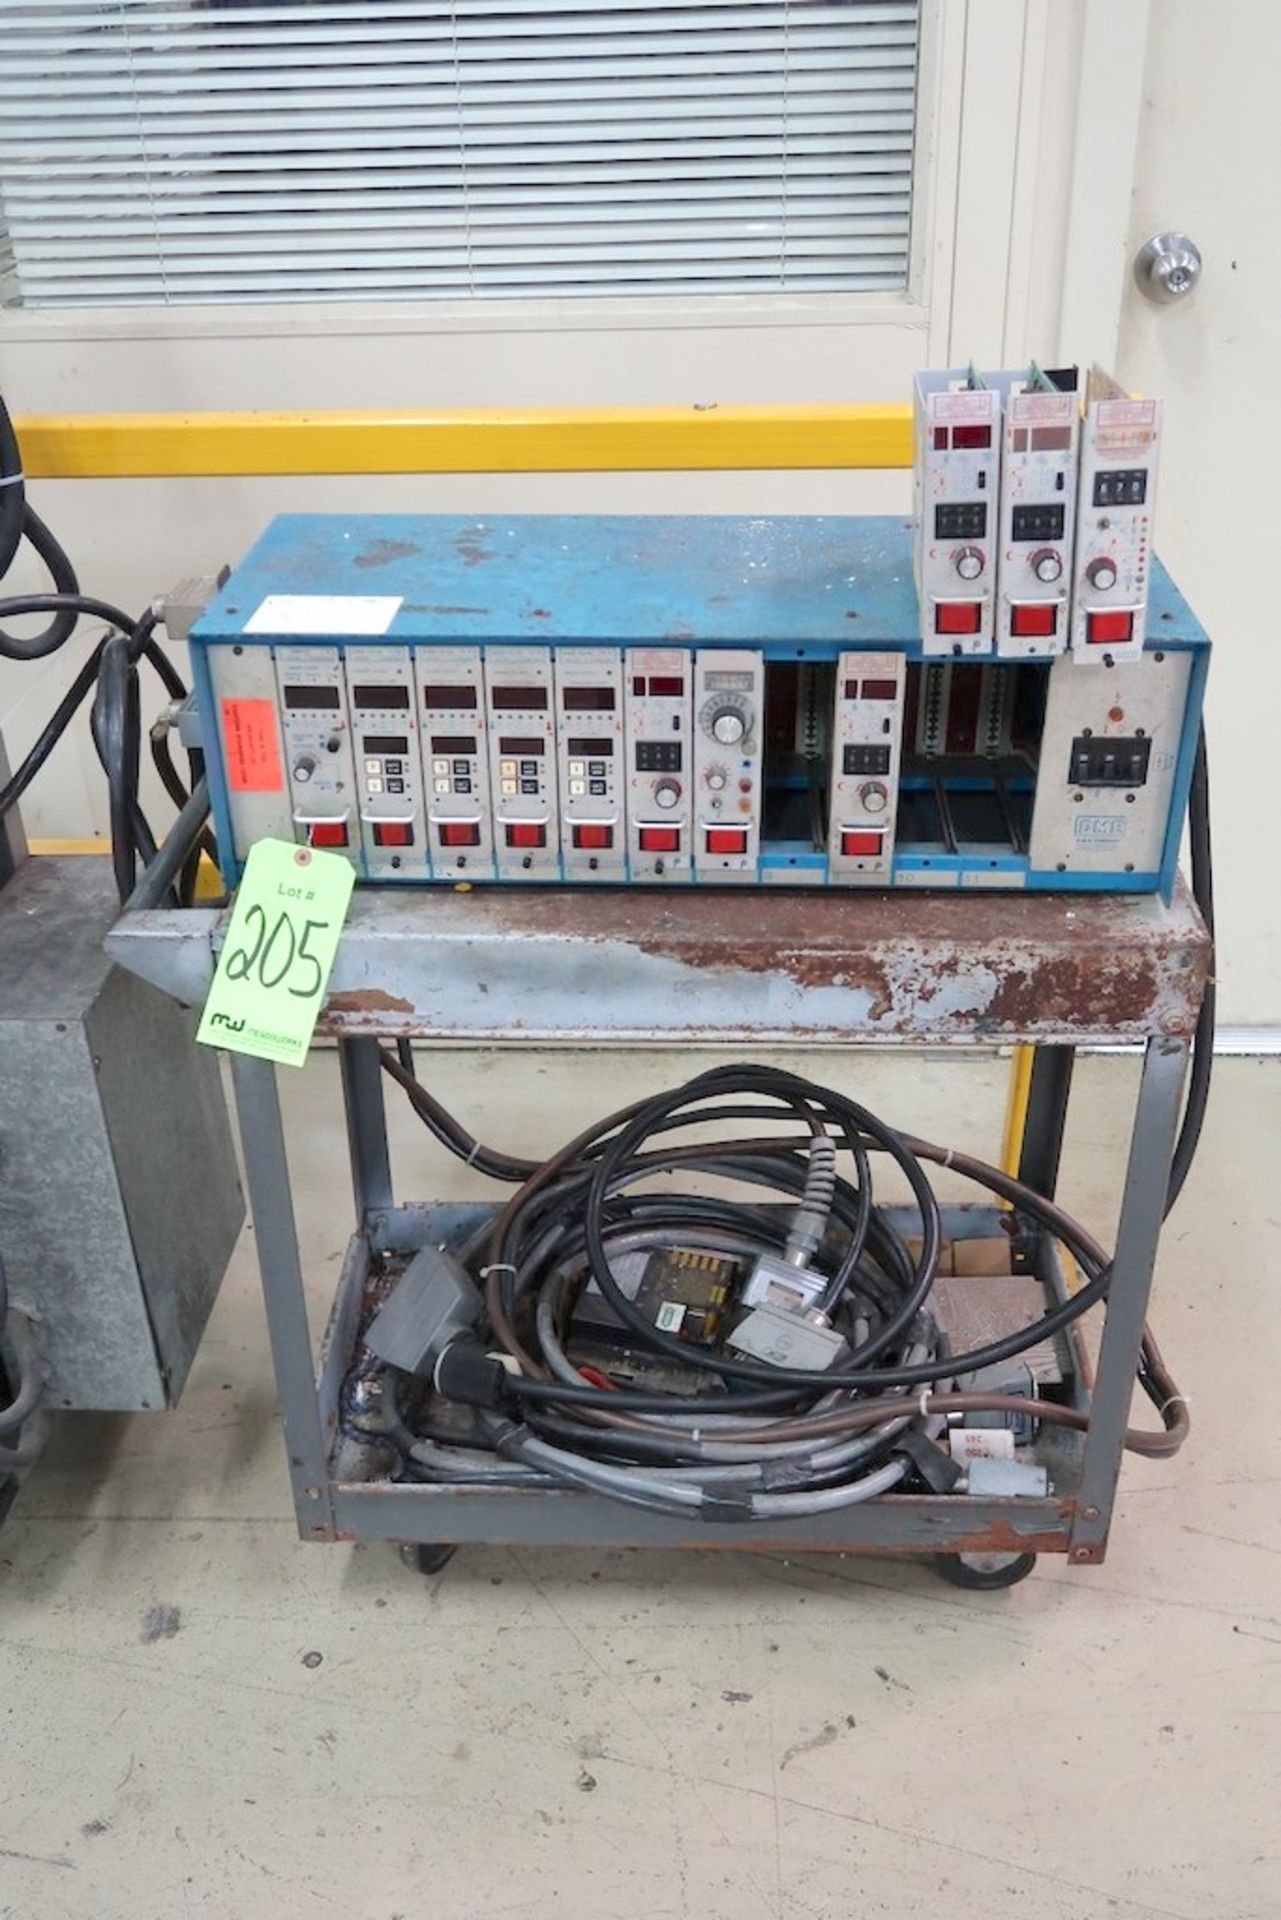 DME 12-Zone Hot Runner Controller with (7) Cards & Sorgel 45 KVA Transformer on Cart